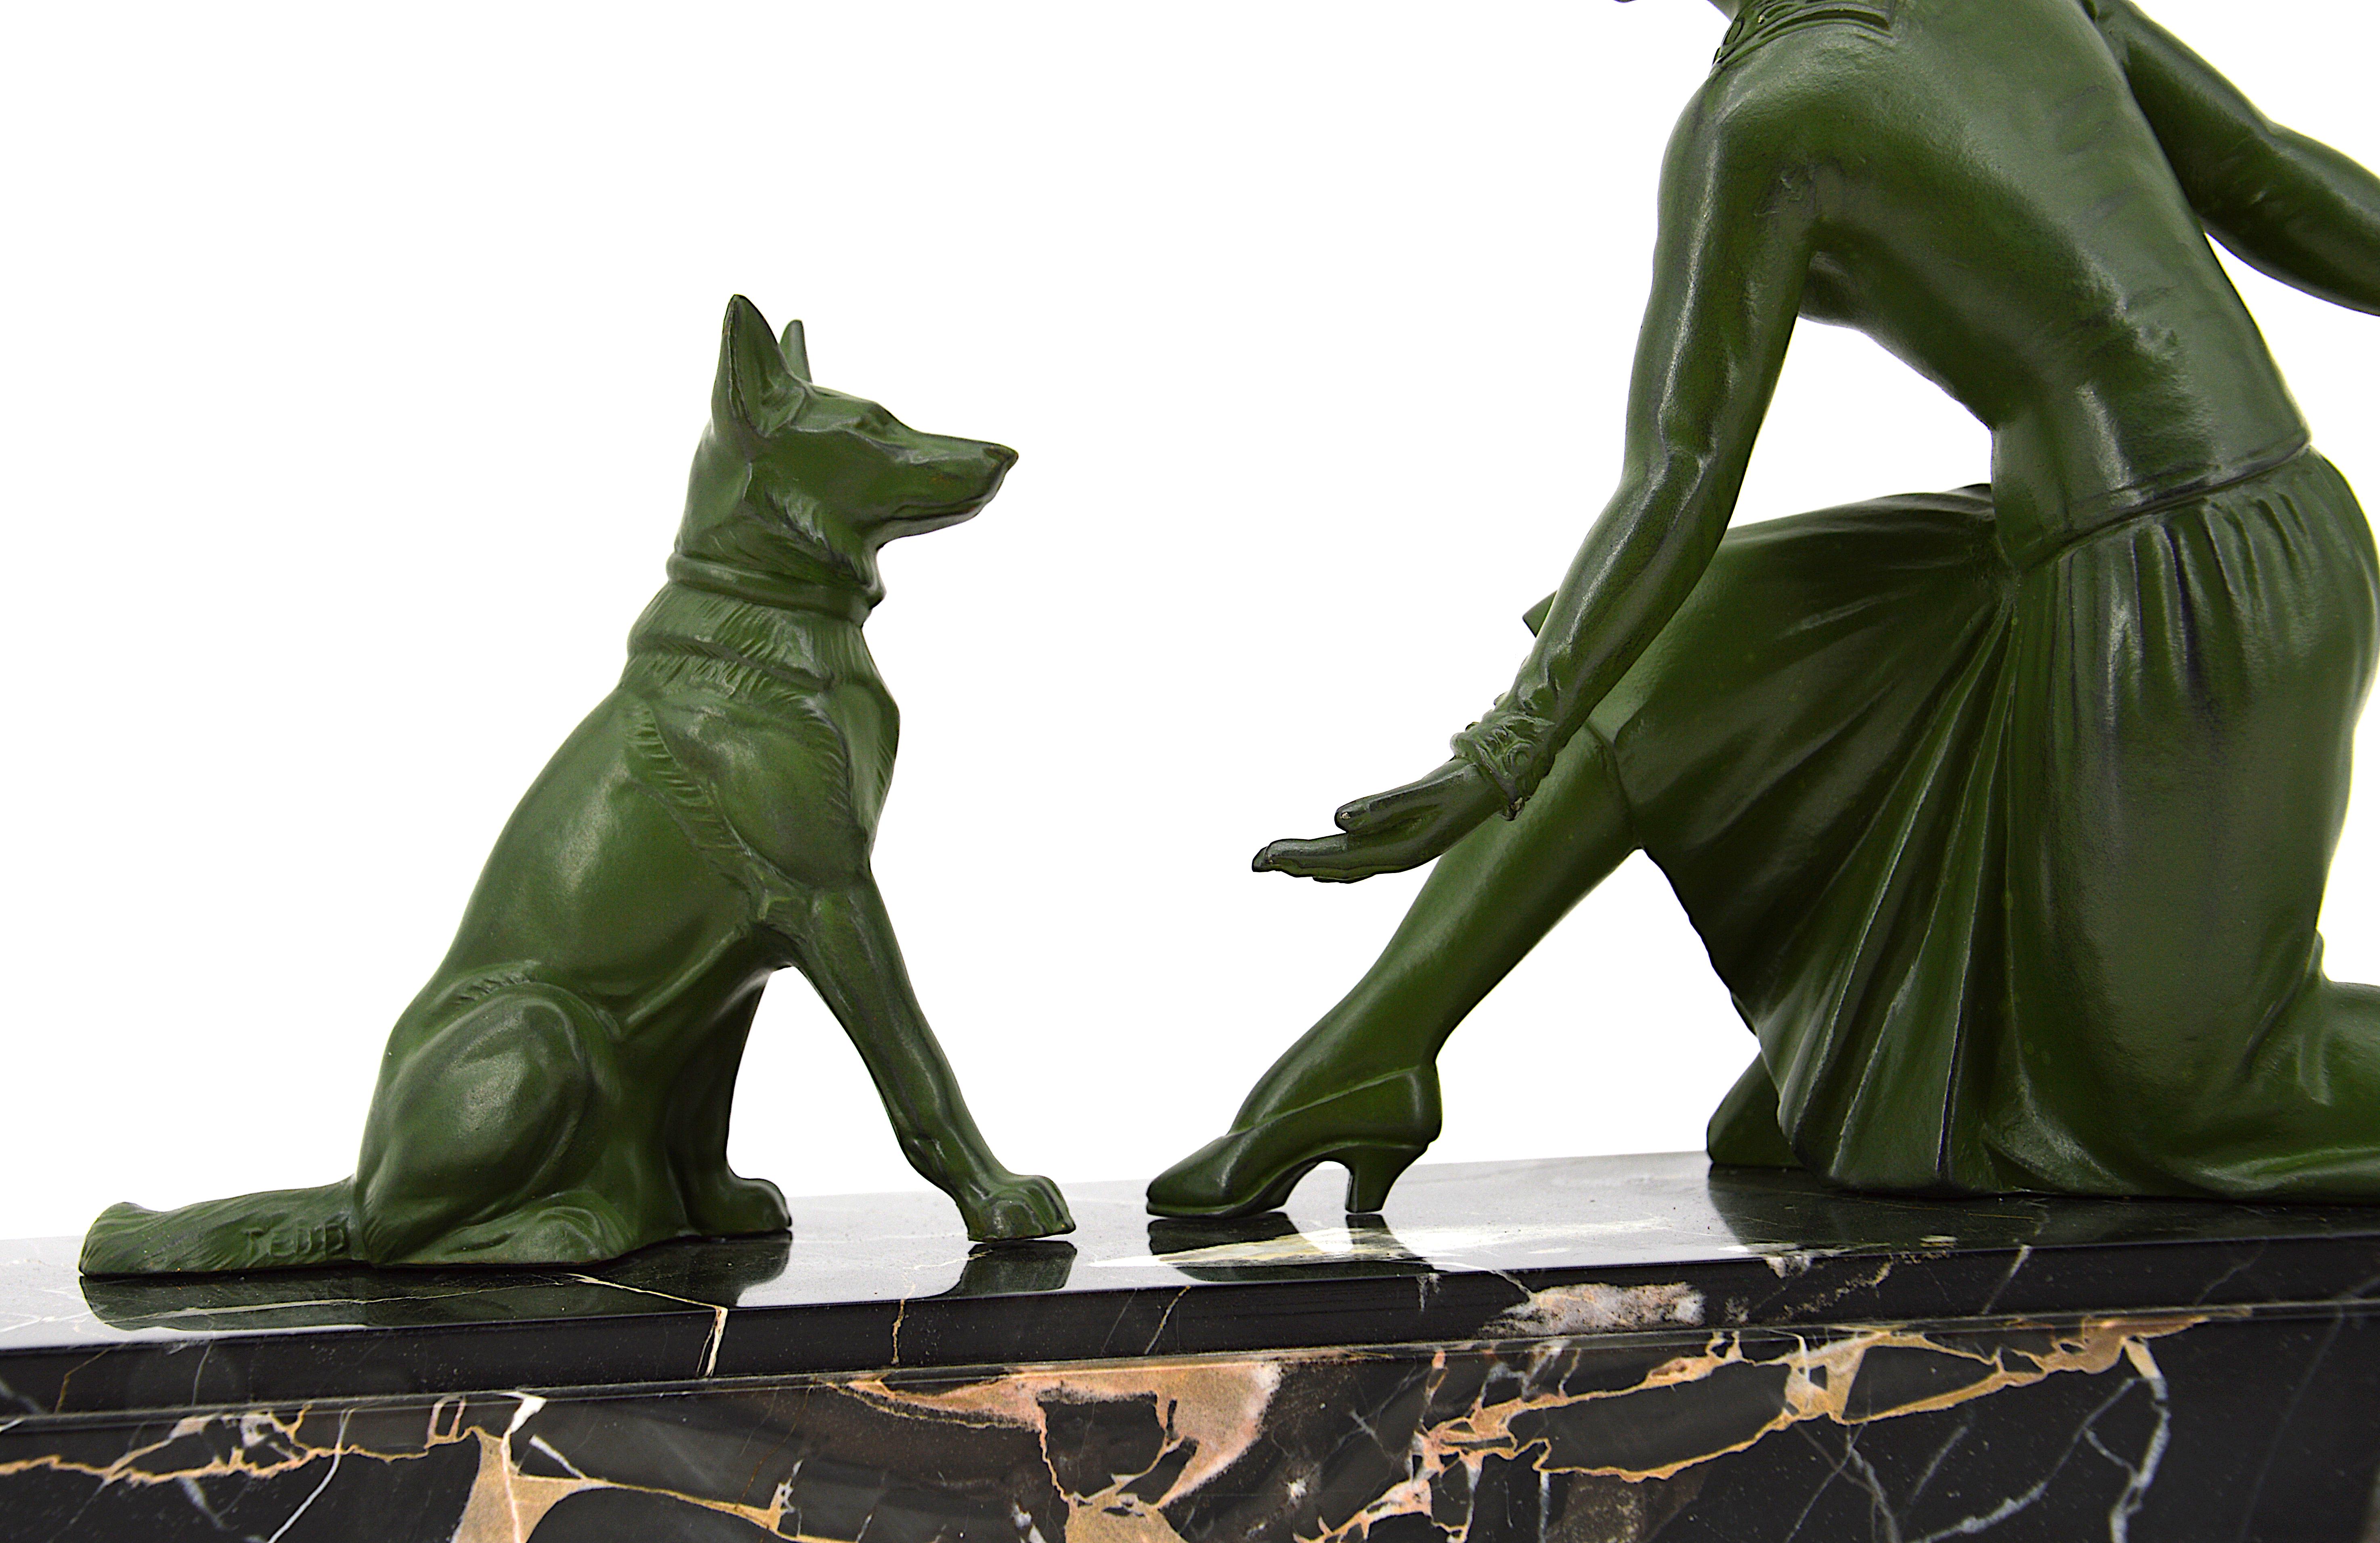 Mid-20th Century Tedd French Art Deco Sculpture, Lady and German Shepherd, 1930s For Sale